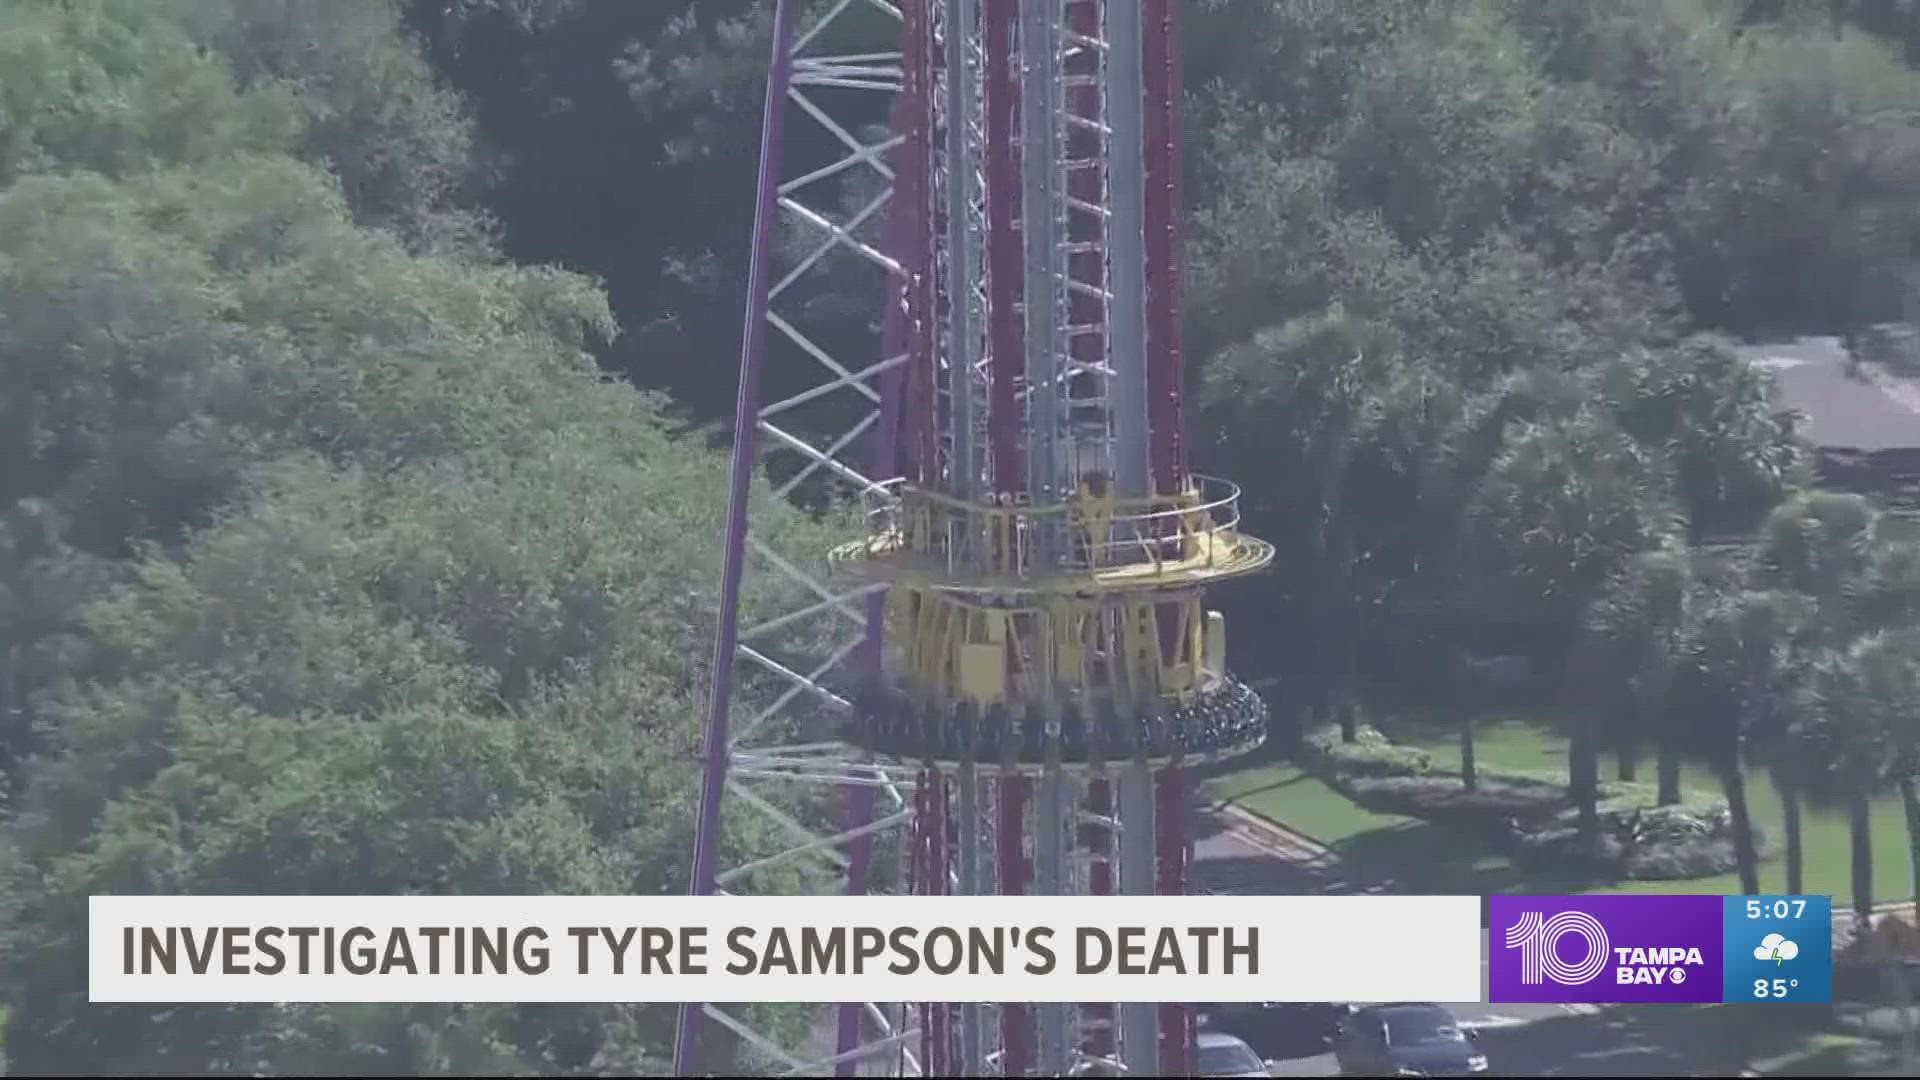 On March 24, 14-year-old Tyre Sampson fell to his death from an amusement park ride at Orlando's ICON Park.